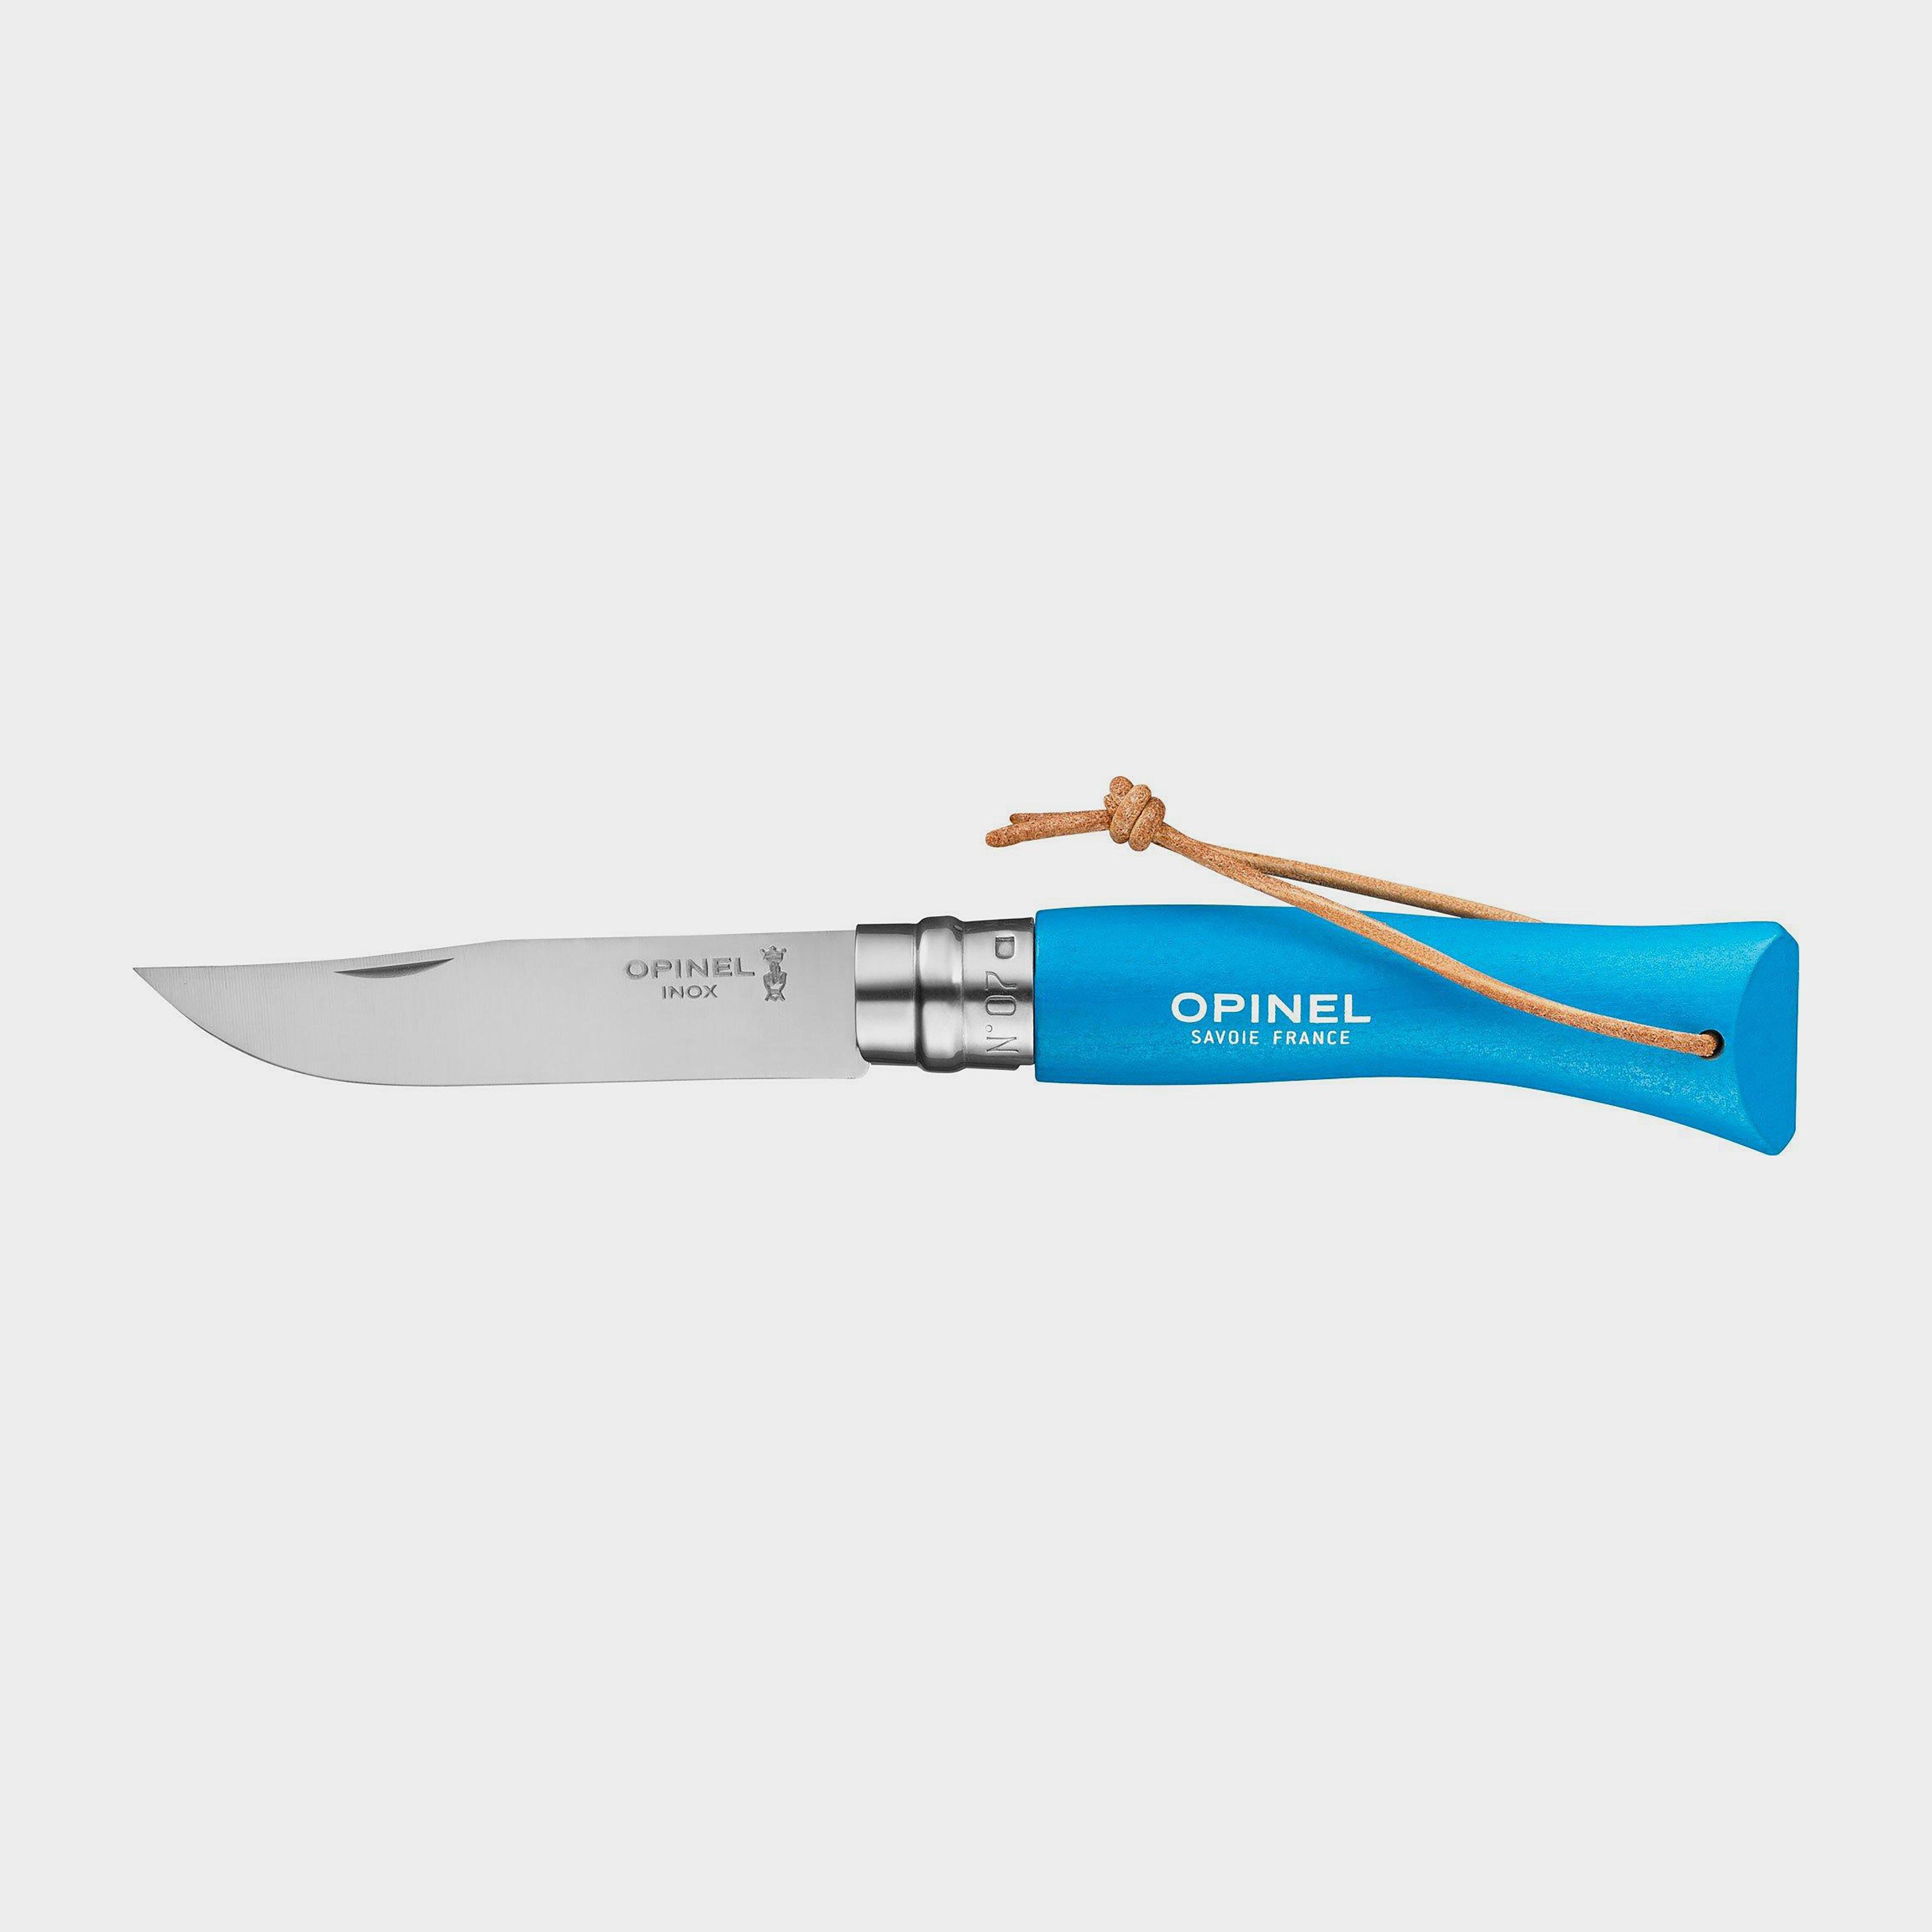 Photos - Other for recreation OPINEL Trekking Knife No 7, Blue 